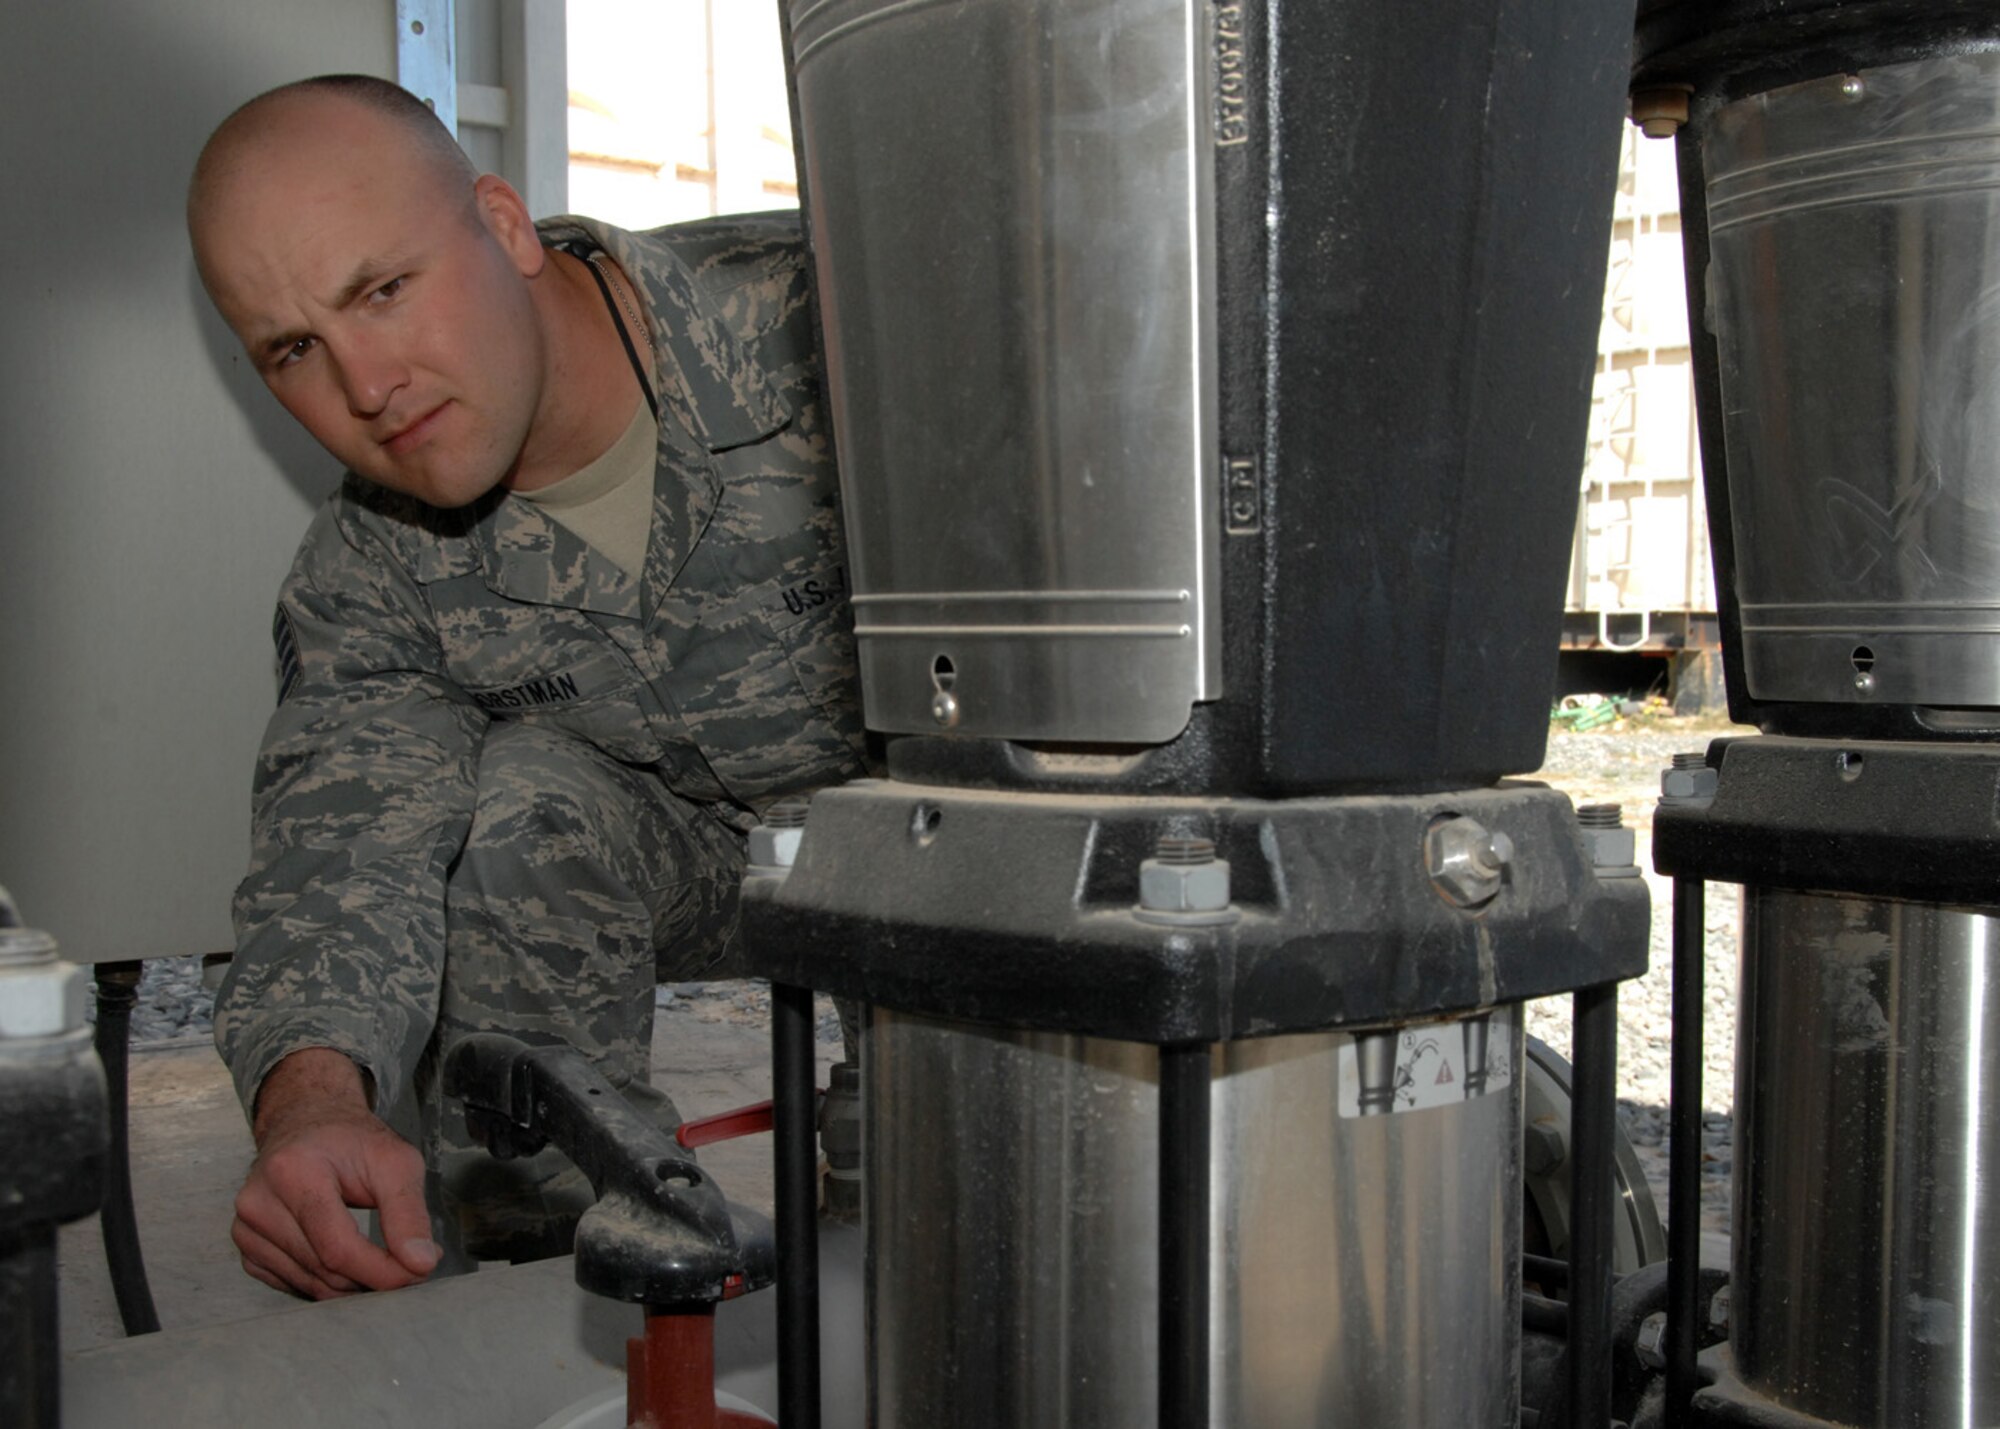 SOUTHWEST ASIA -- Staff Sgt. Josh Horstman, 386th Expeditionary Civil Engineer Squadron, checks the temperature gauge on a water pump system at an air base in Southwest Asia, Feb. 4.  Sergeant Horstman is a plumber currently deployed from the 114th Fighter Wing at Foss Field, S.D. (U.S. Air Force photo/Senior Airman Courtney Richardson)